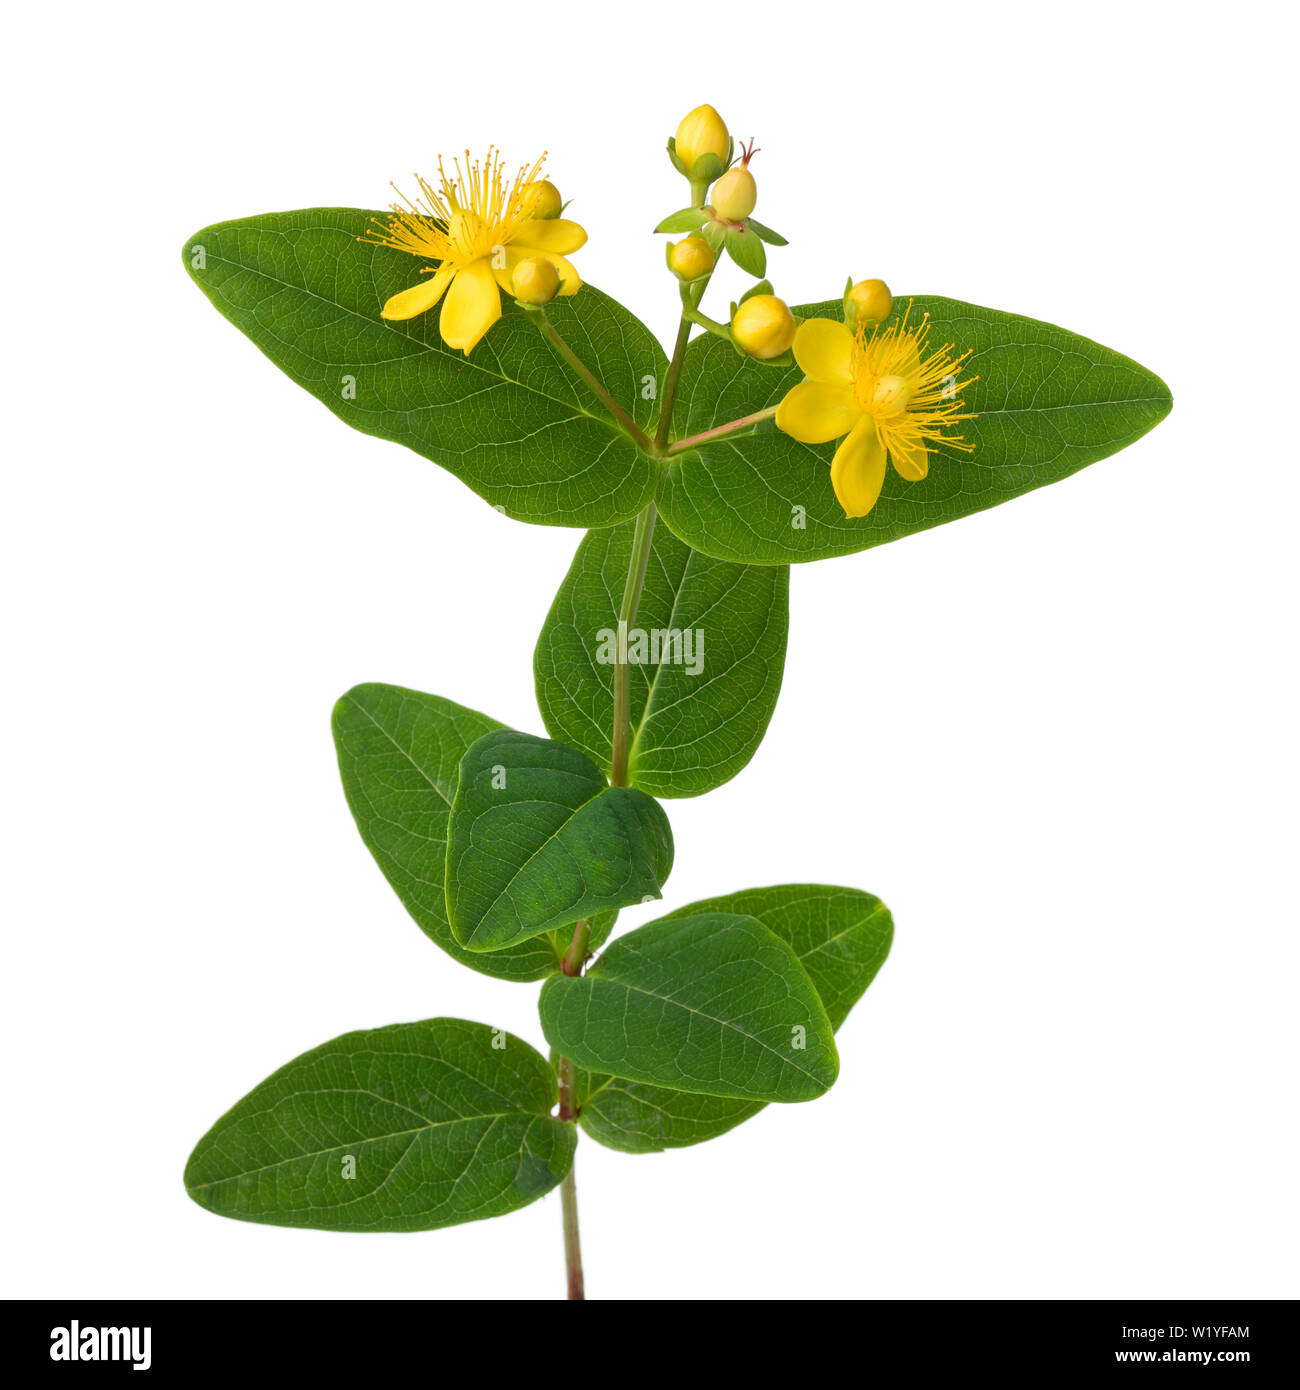 Yellow St John's wort flower and leaves isolated on white background Stock Photo